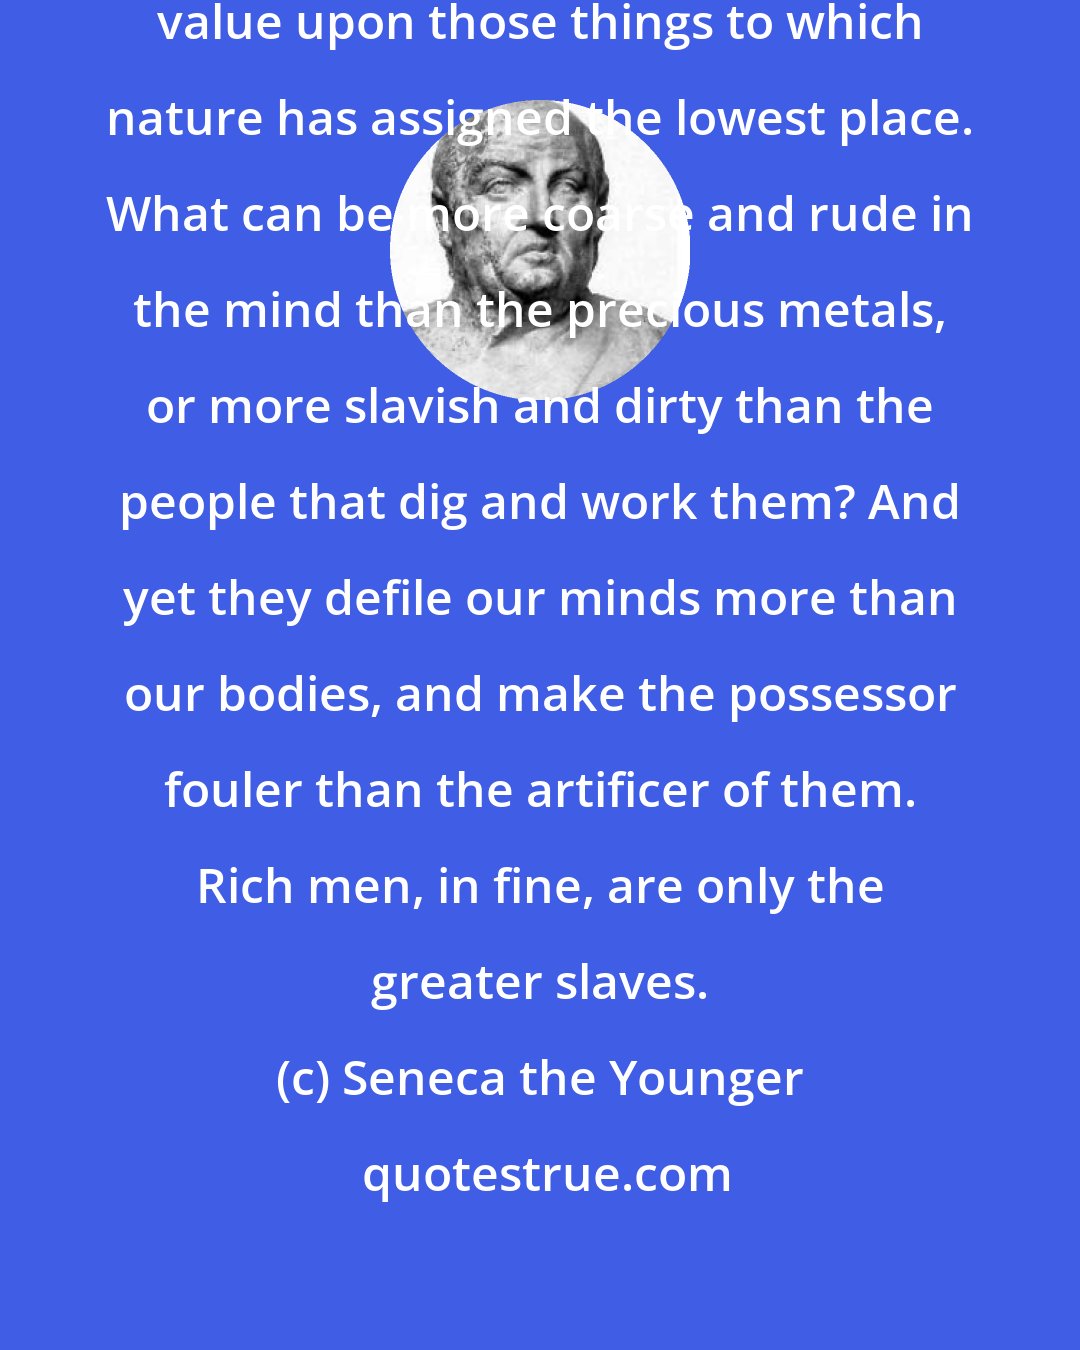 Seneca the Younger: We are so vain as to set the highest value upon those things to which nature has assigned the lowest place. What can be more coarse and rude in the mind than the precious metals, or more slavish and dirty than the people that dig and work them? And yet they defile our minds more than our bodies, and make the possessor fouler than the artificer of them. Rich men, in fine, are only the greater slaves.